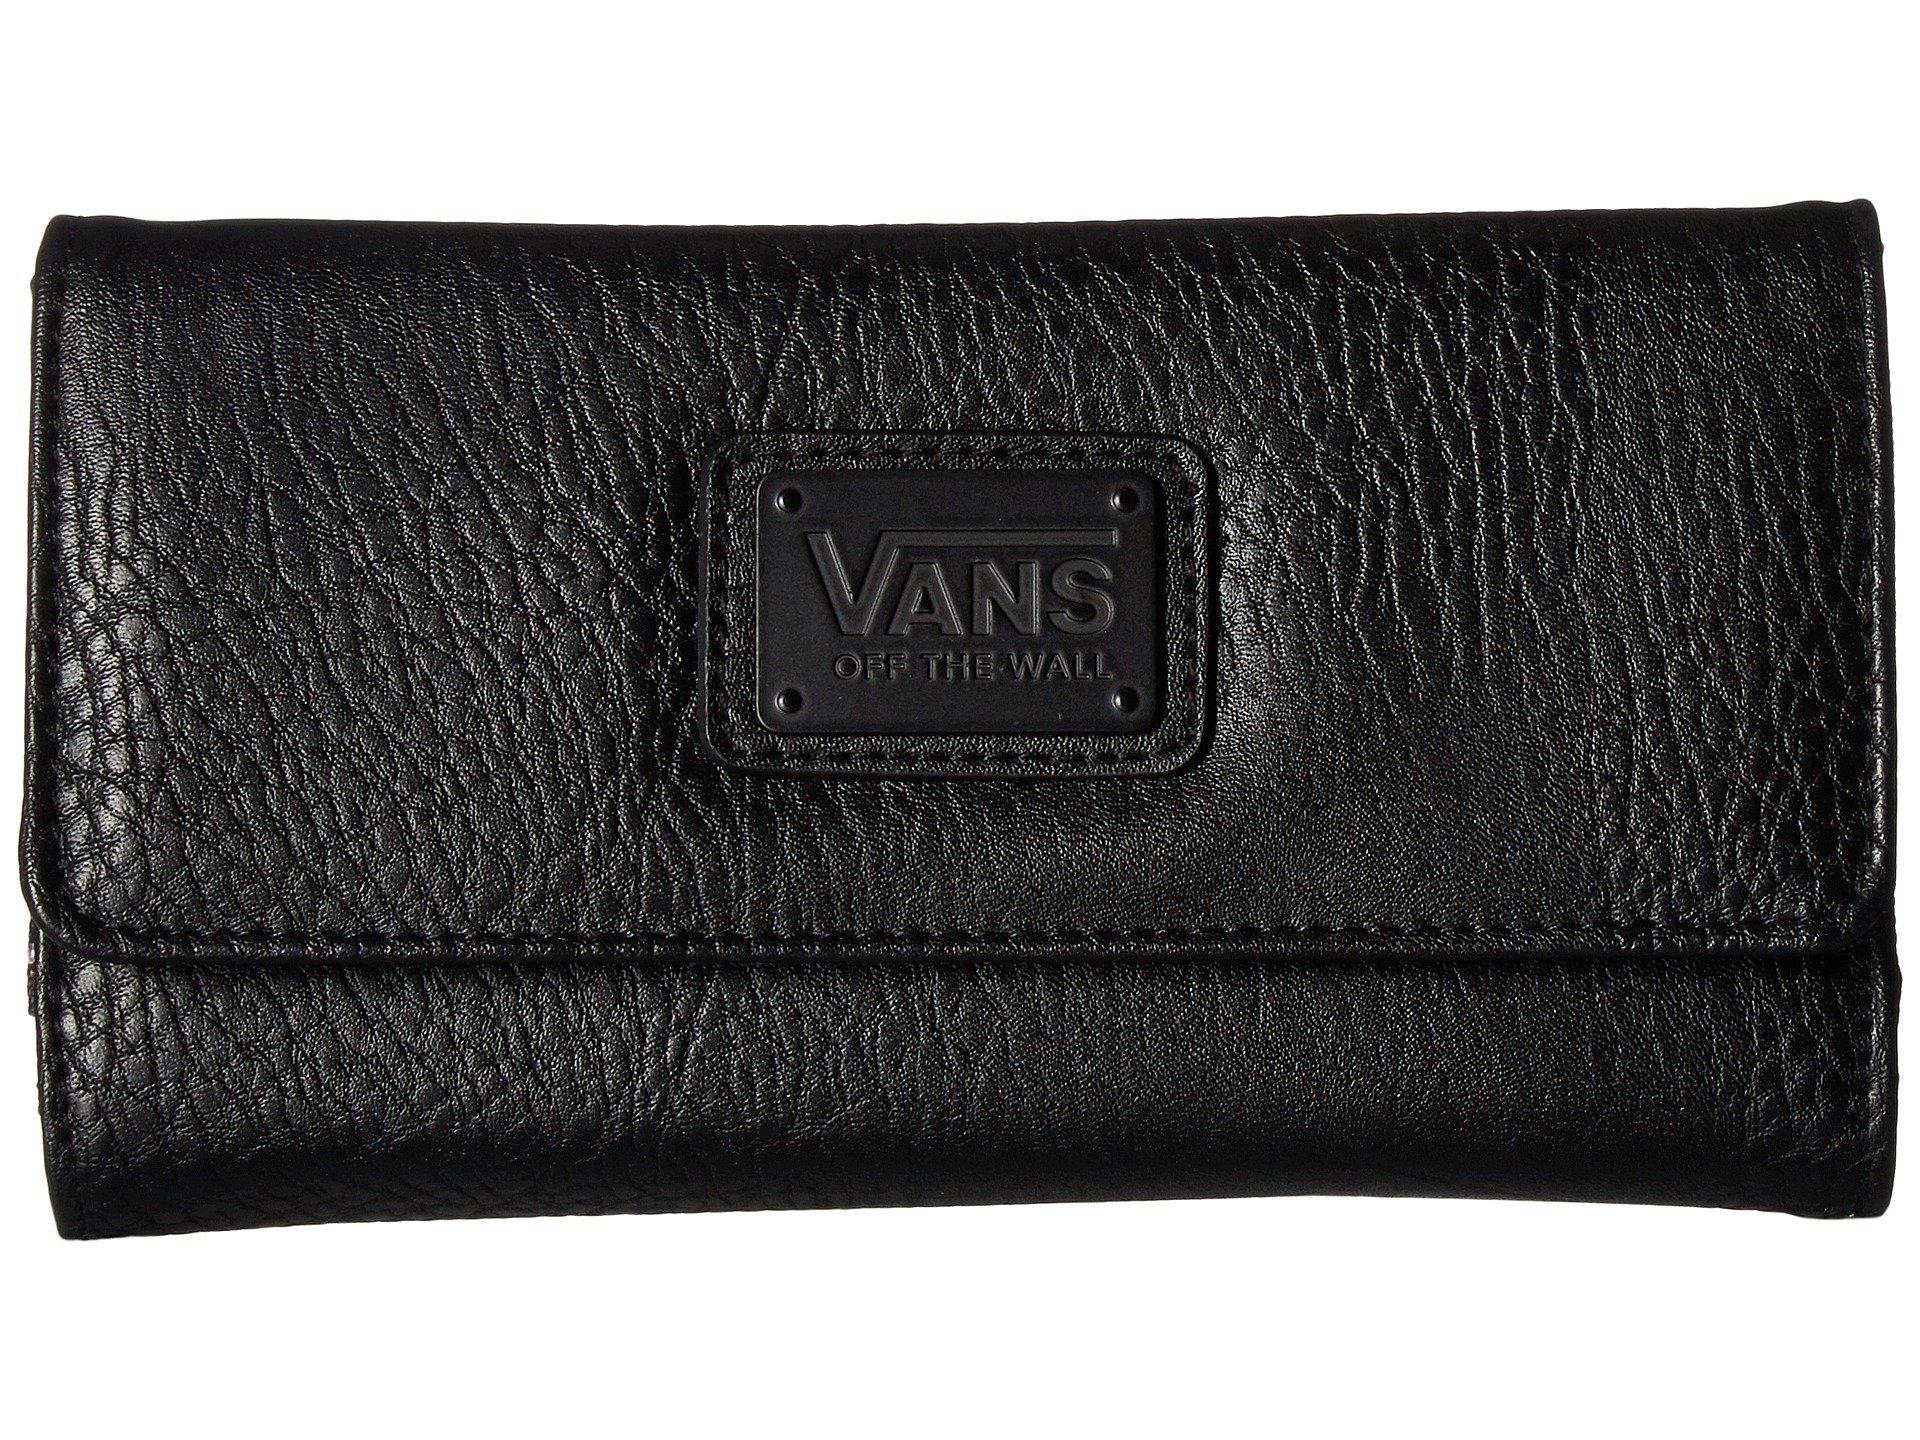 Vans Chained Reaction Wallet in Black - Lyst